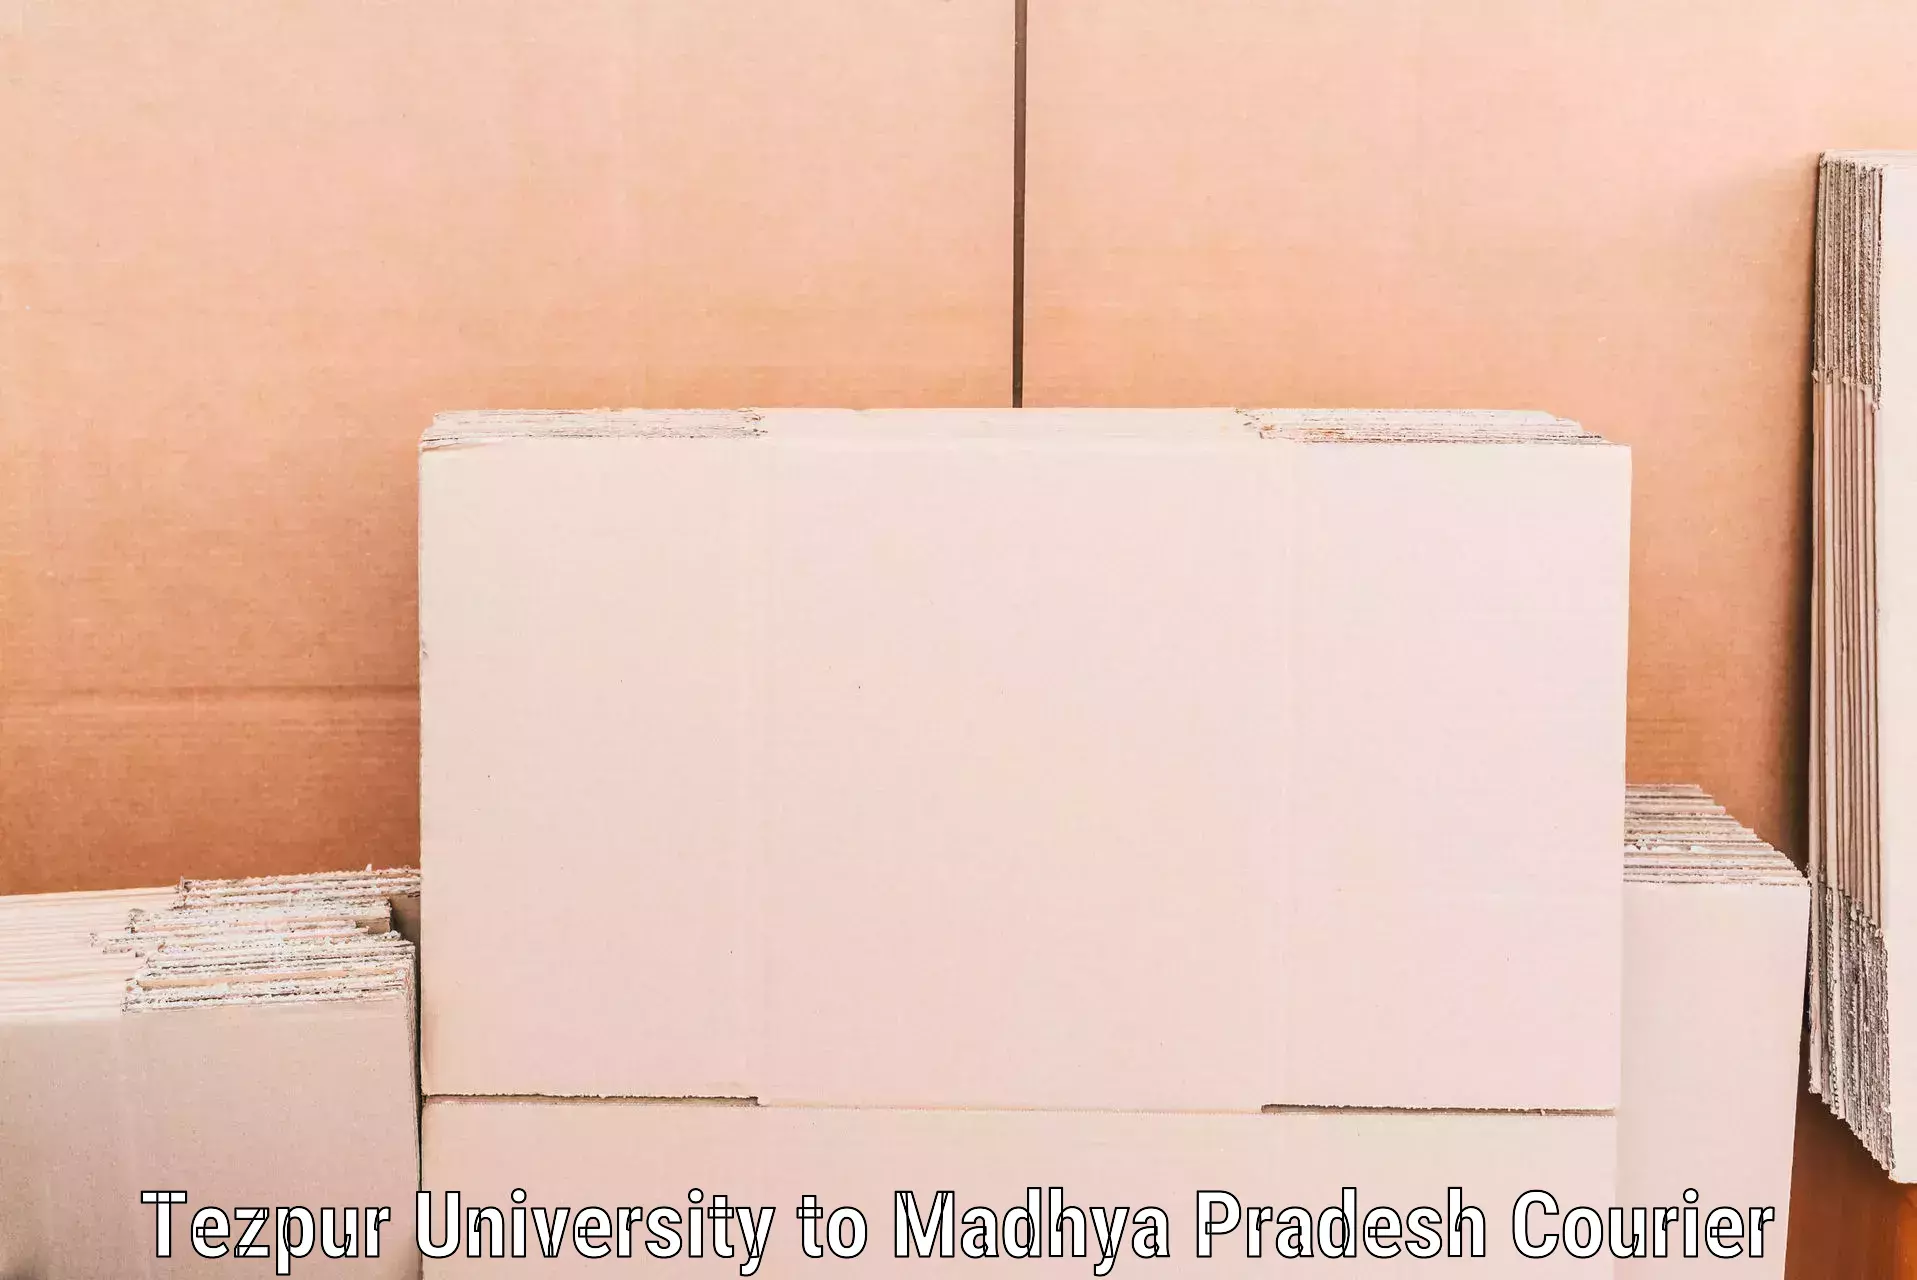 Professional home movers Tezpur University to Ghugri